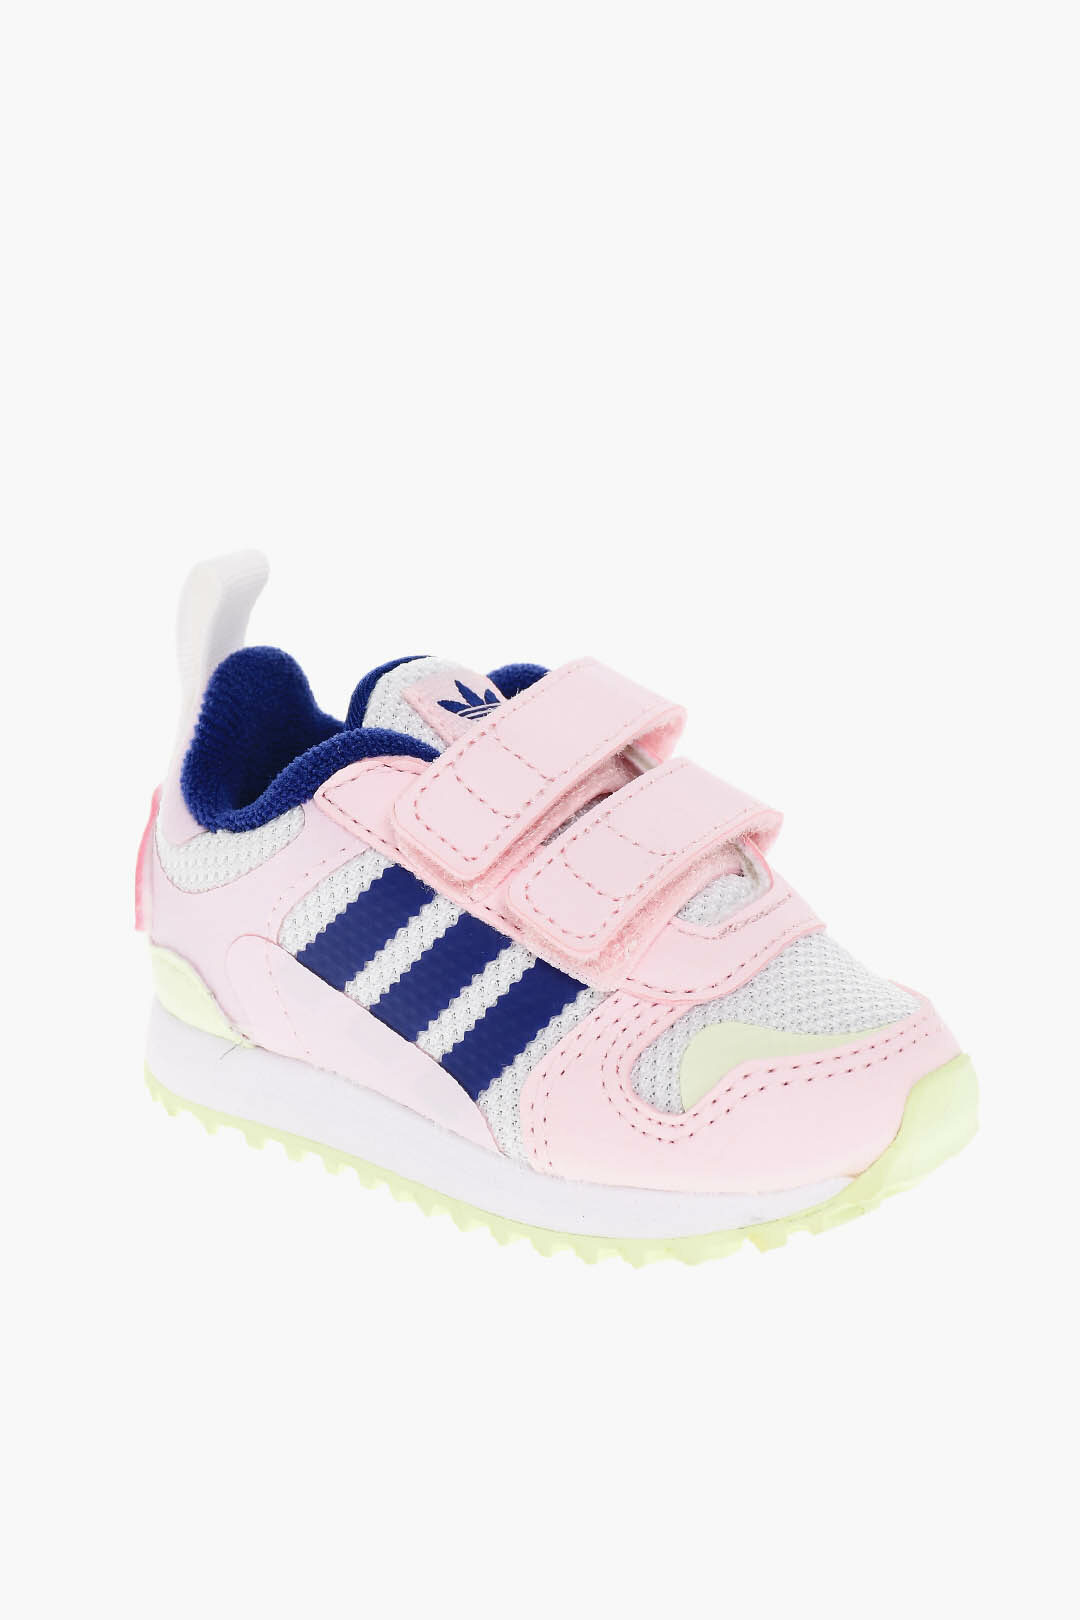 clase embotellamiento Tengo una clase de ingles Adidas Kids ZX 700 HD CF Low Sneakers with Velcro Fastening girls - Glamood  Outlet